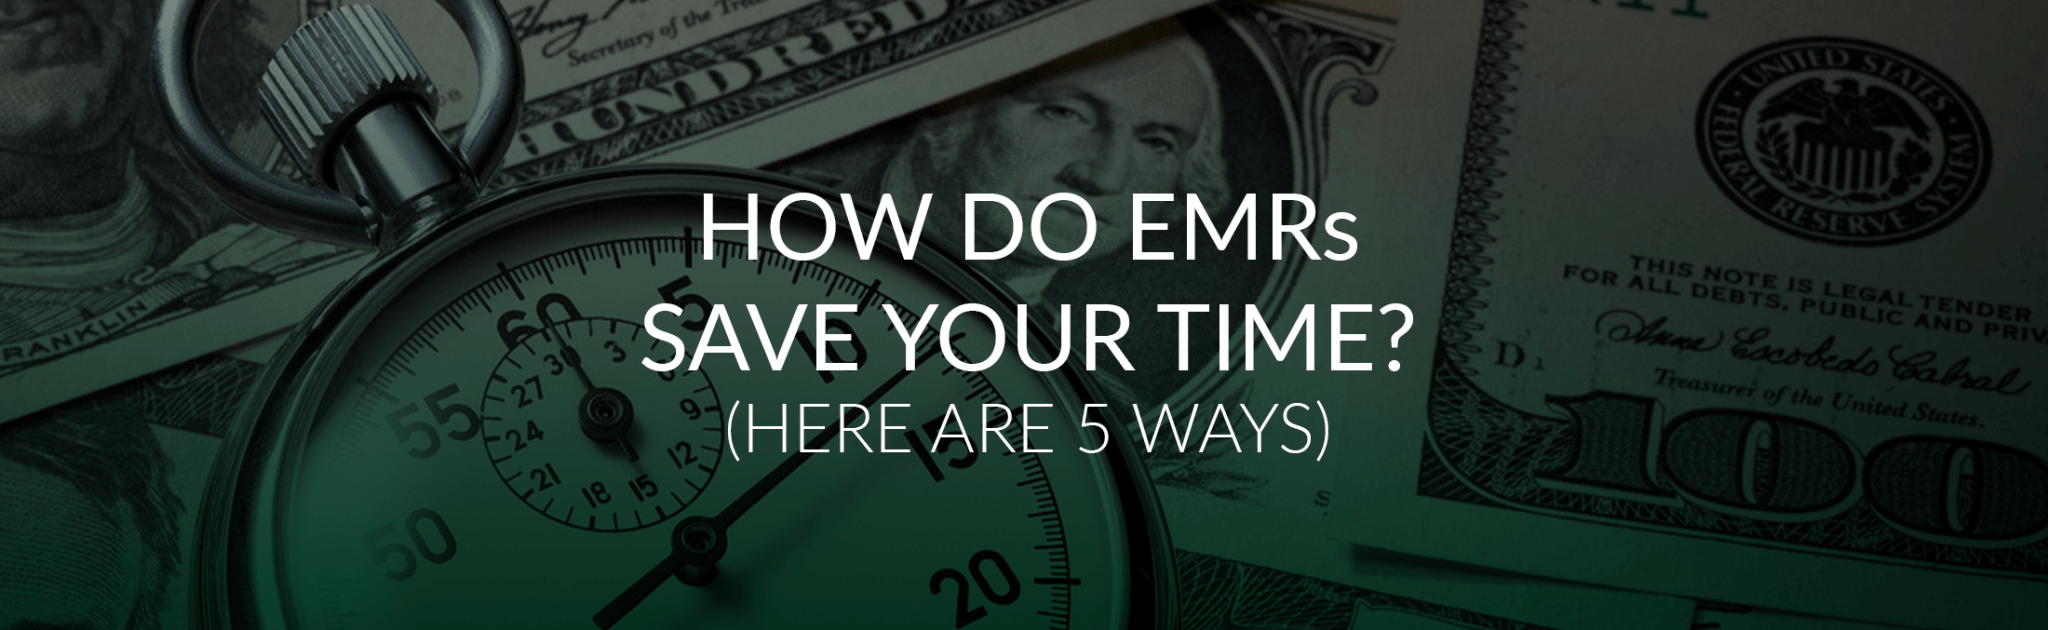 How do emrs save time